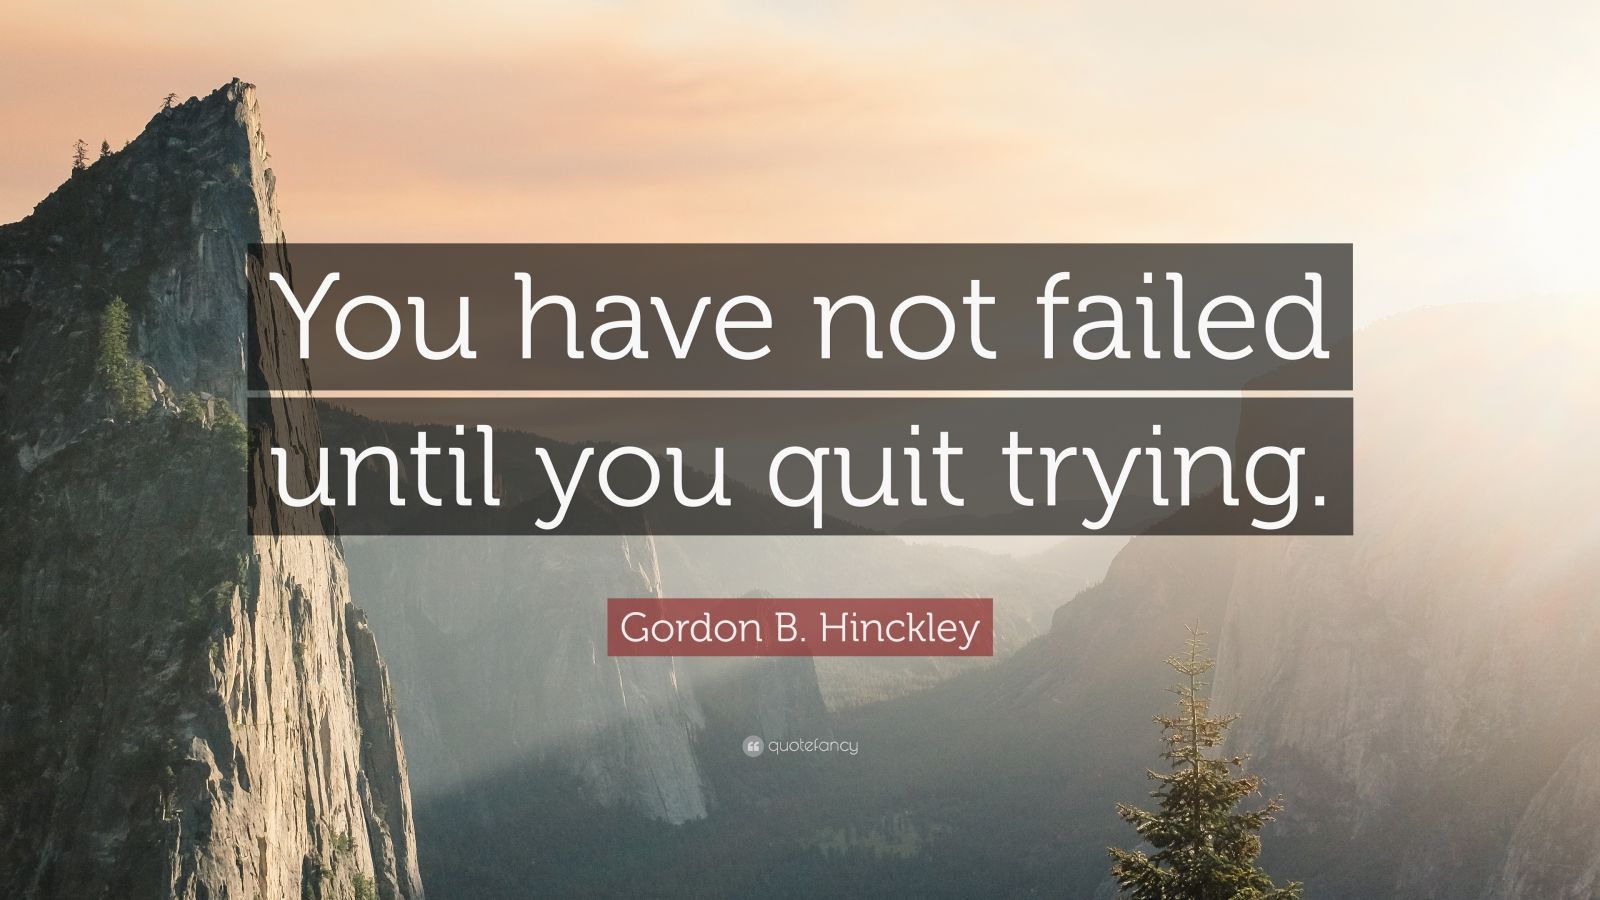 Gordon B. Hinckley Quote: “You have not failed until you quit trying ...